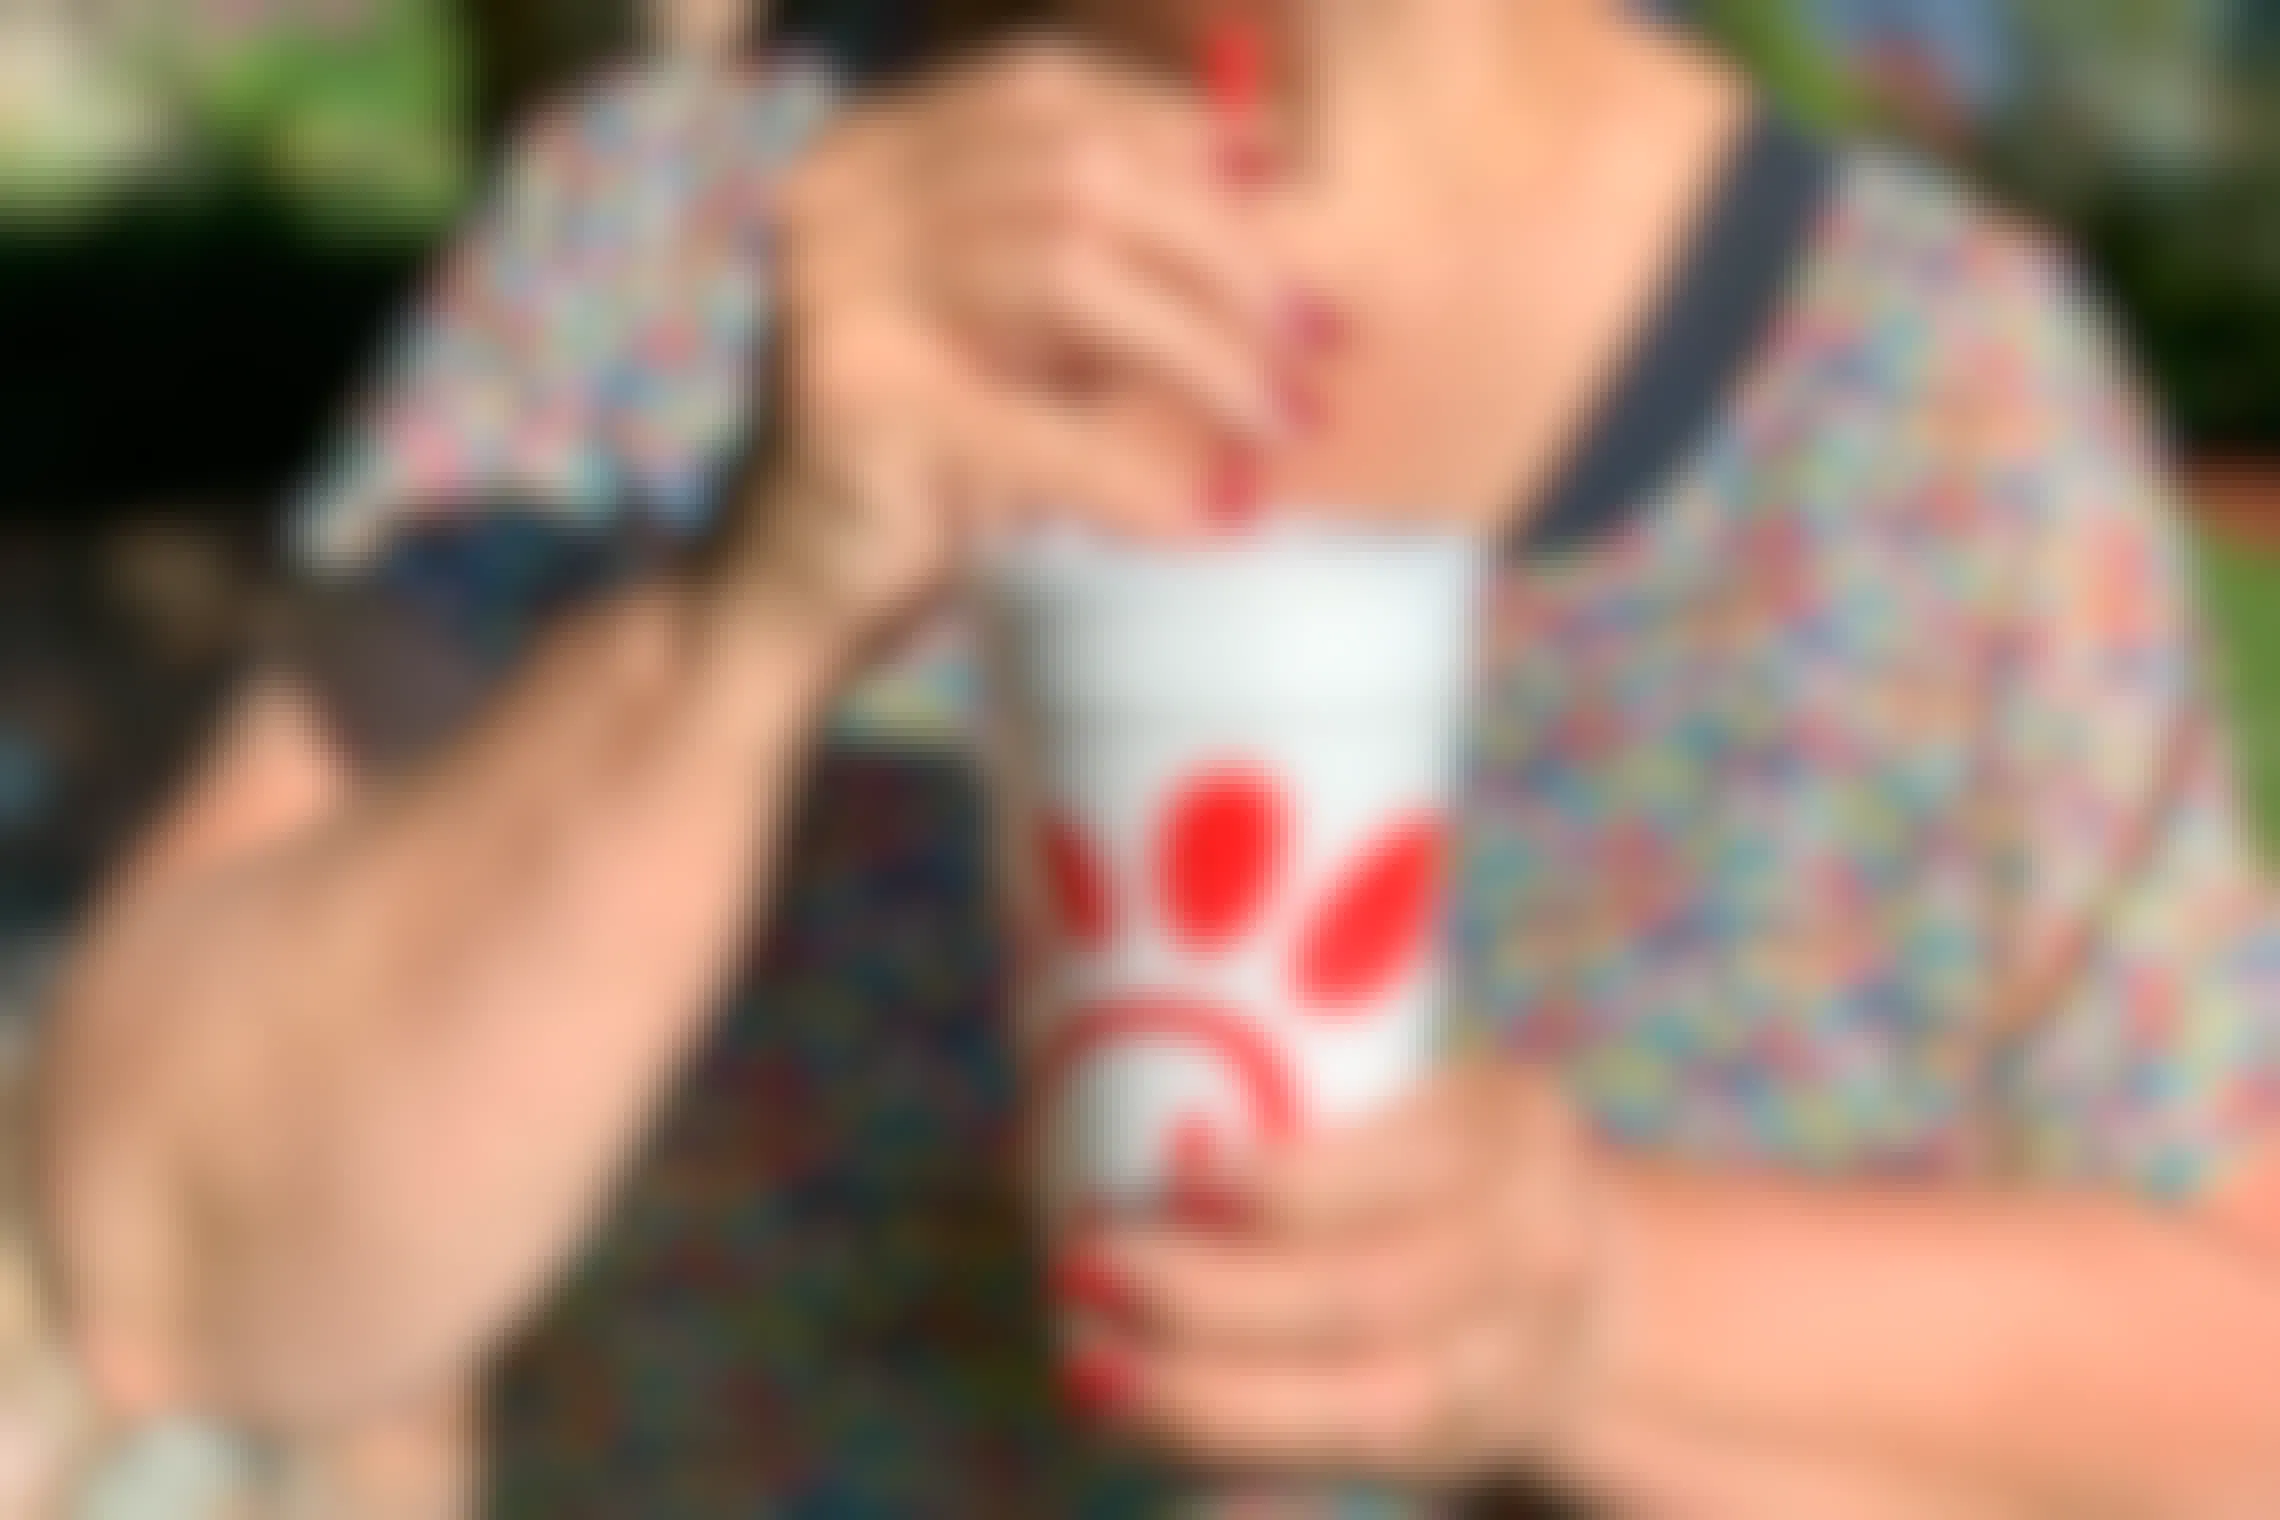 A senior-aged woman drinking soda from a Chick-fil-A drink cup.